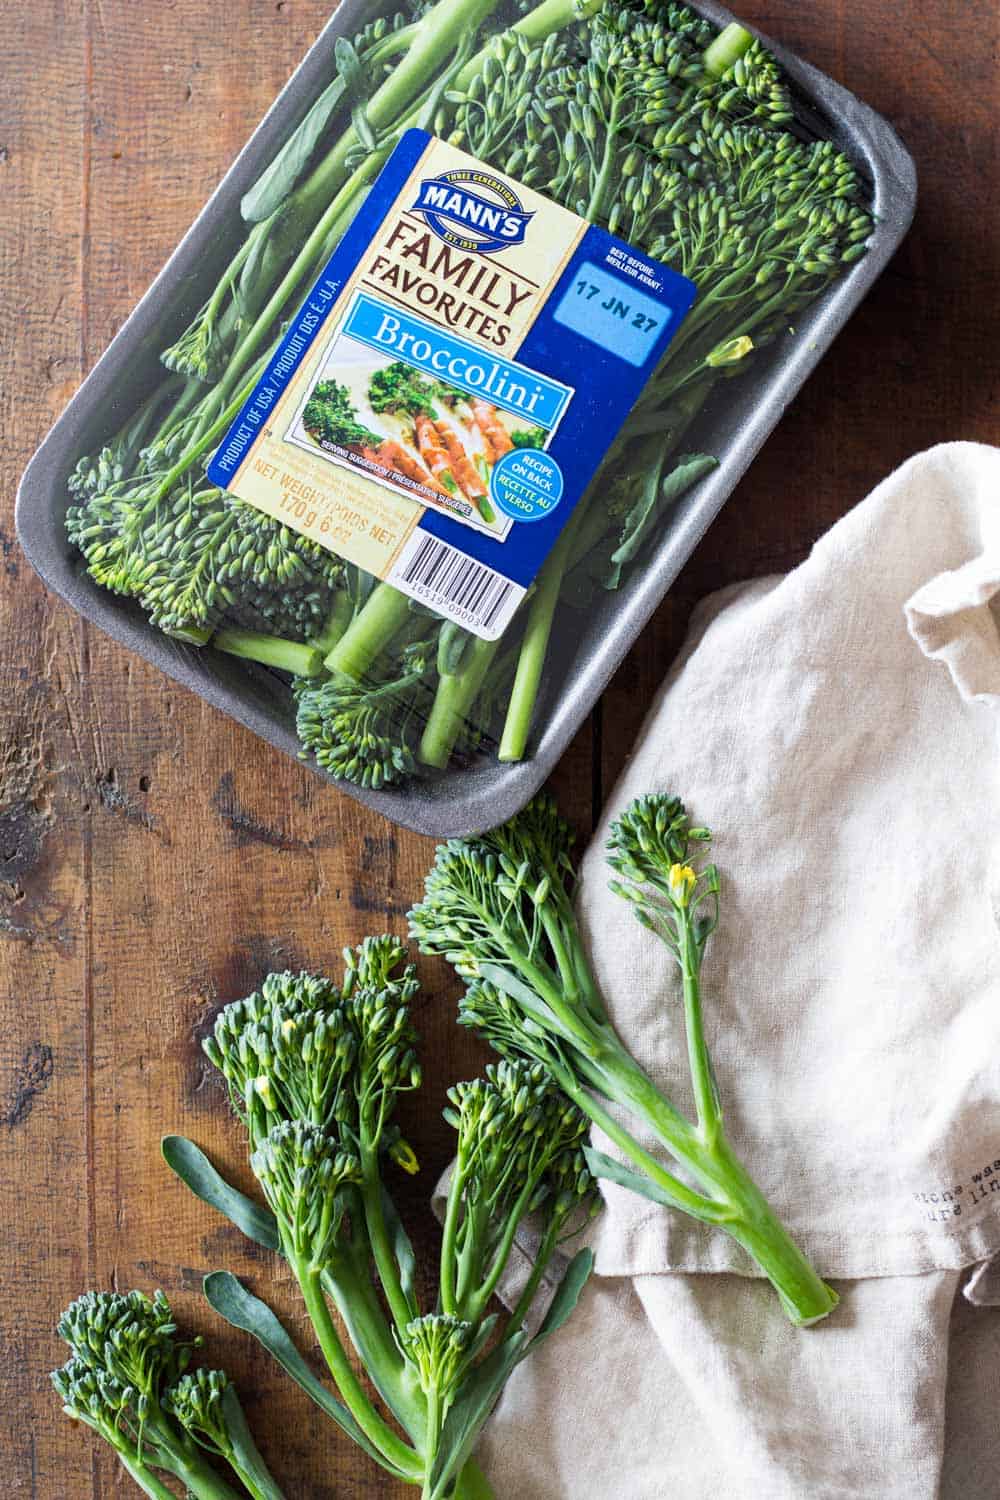 Mann's broccolini package and loose broccolini branches presented outside the package on a table